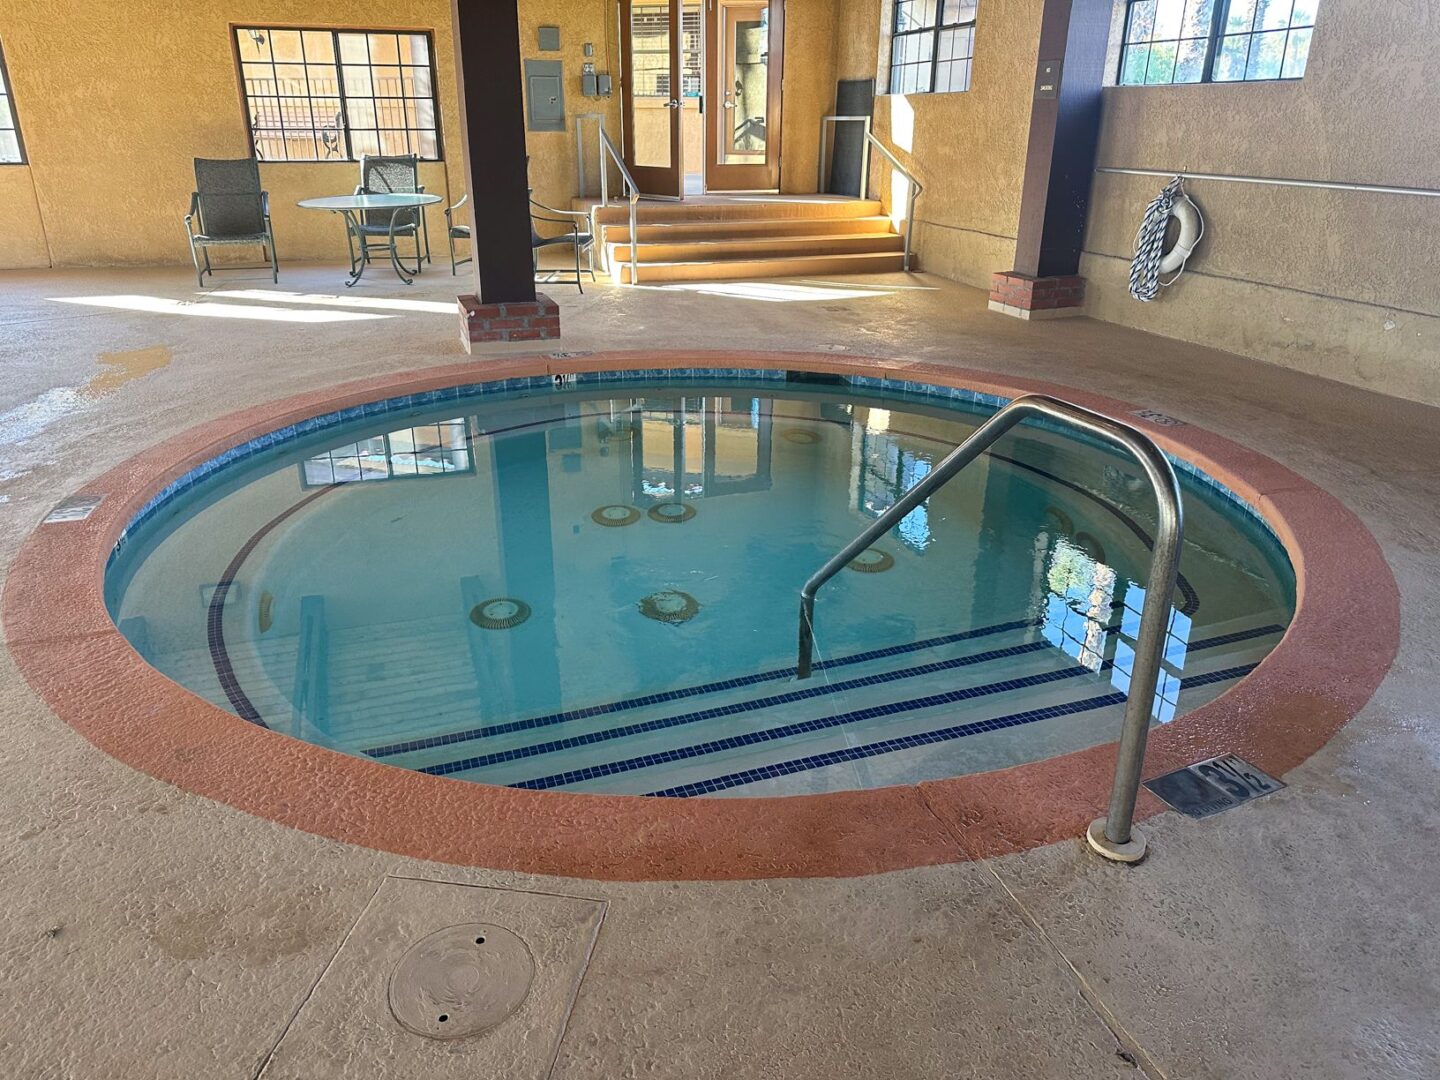 A pool with a hot tub in the middle of a room.